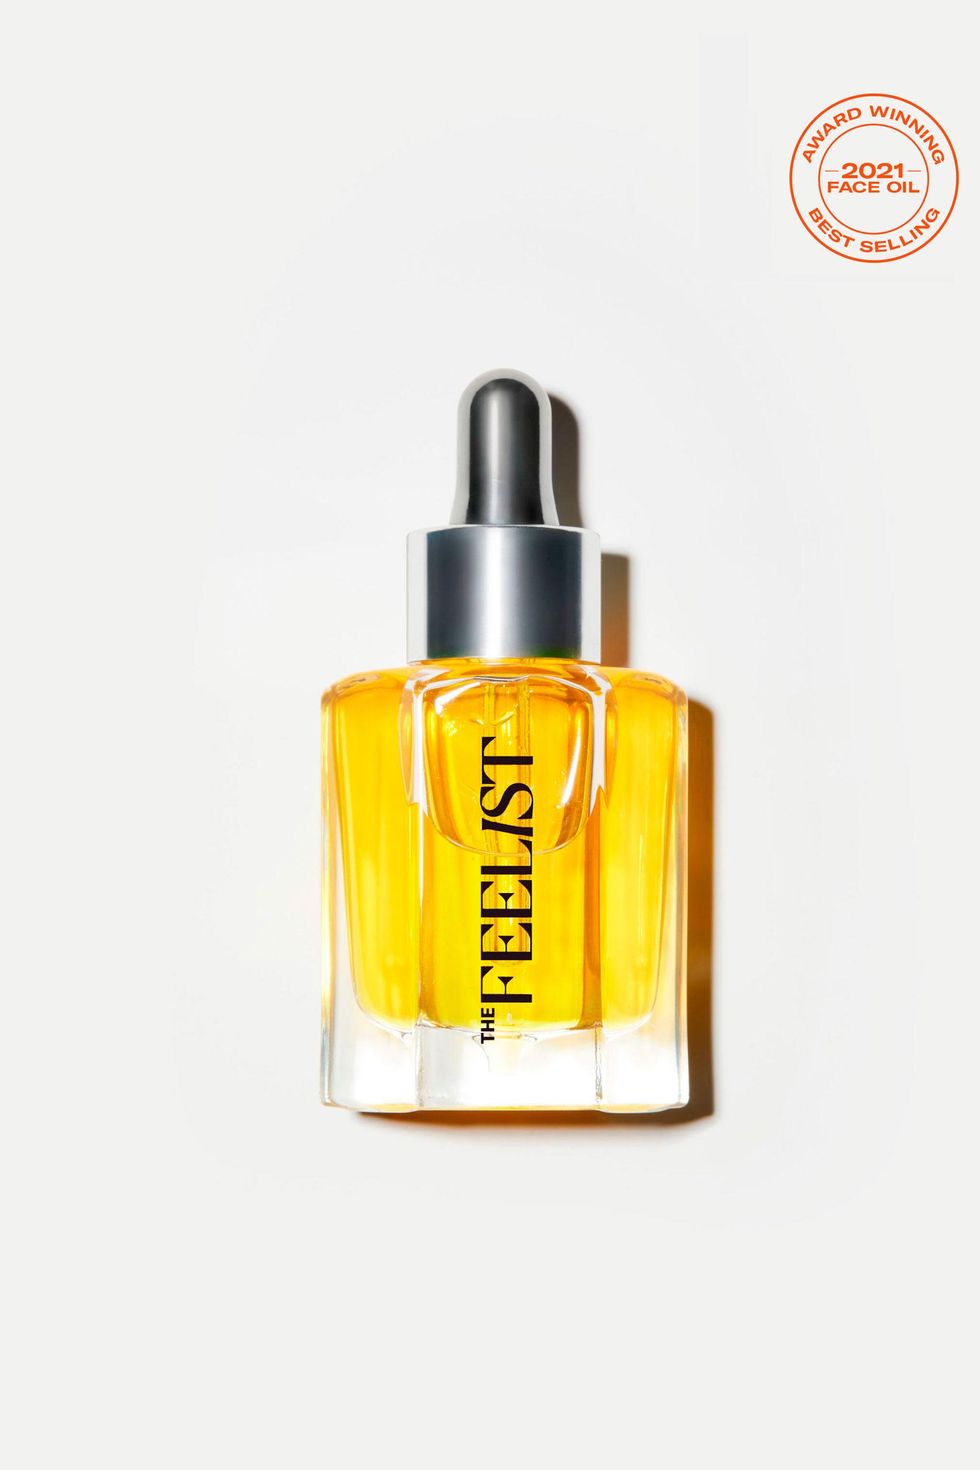 The best travel-size face oil: The Feelist Most Wanted Radiant Facial Oil